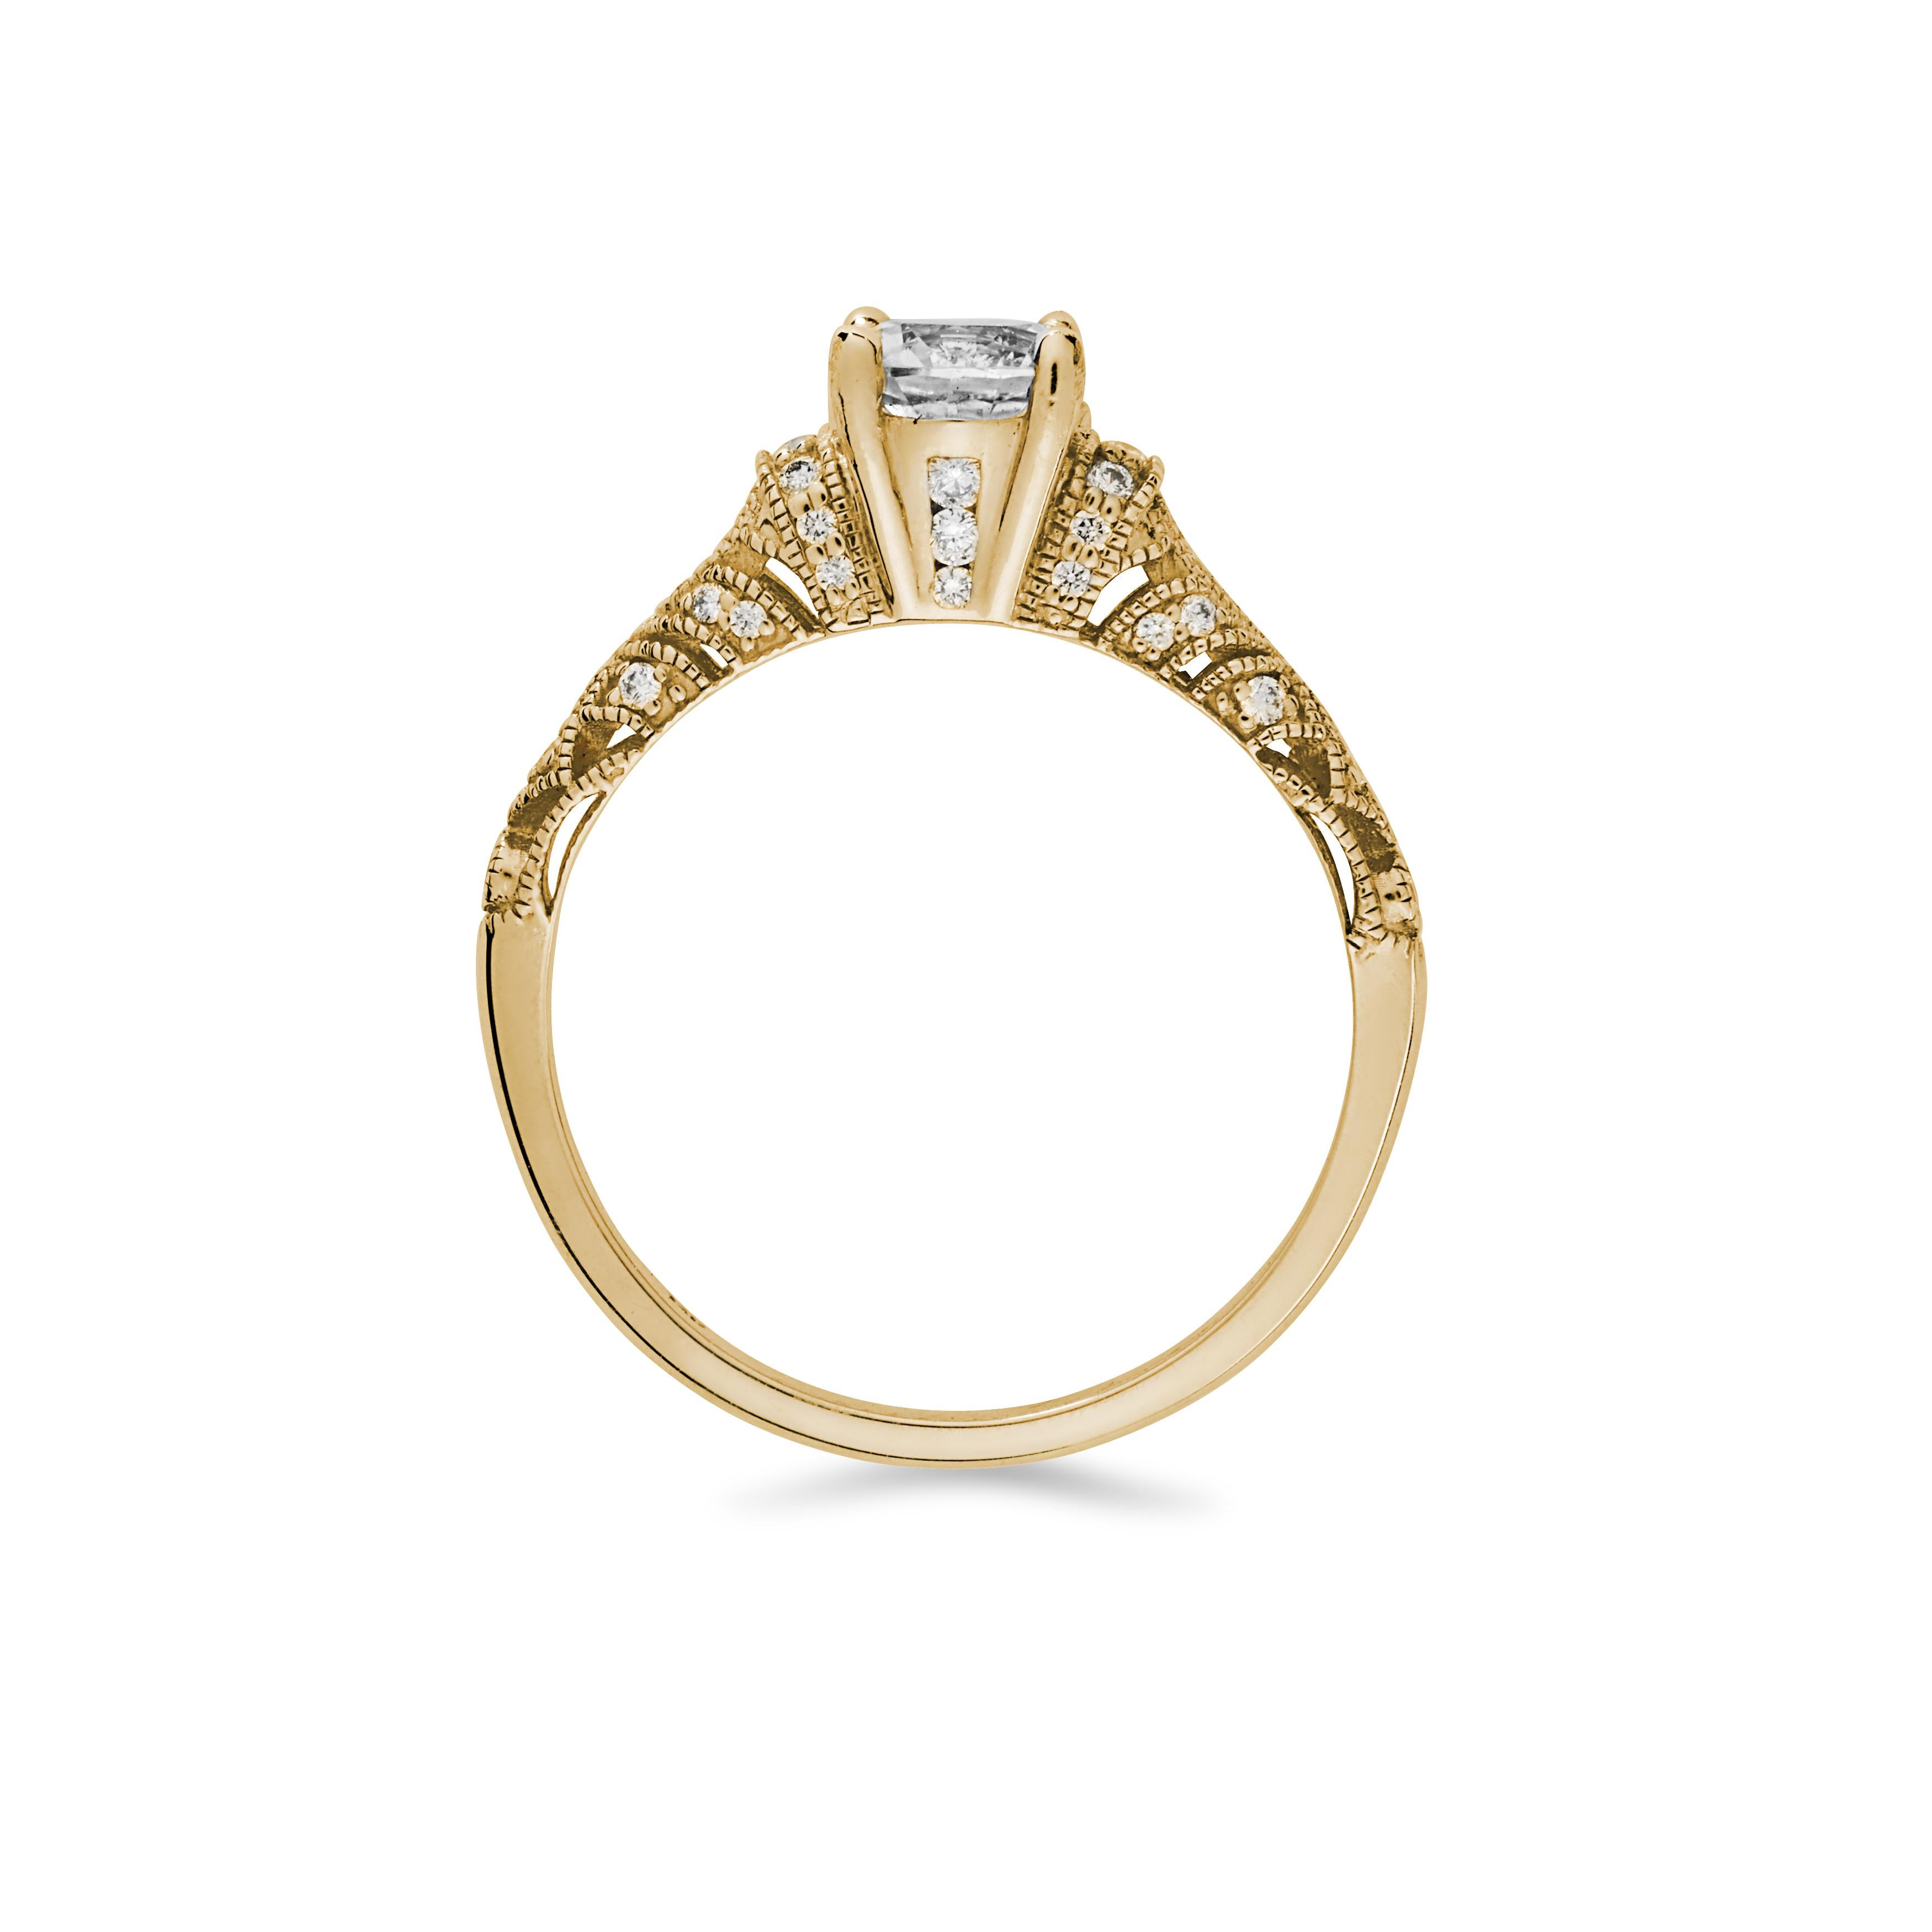 This vintage inspired ring features a round Moissanite center stone. Melee diamonds swirl around the finely detailed base warranting a second look, and a third, and a fourth.

Materials + Dimensions: 14k yellow gold, 0.59ct moissanite center stone,